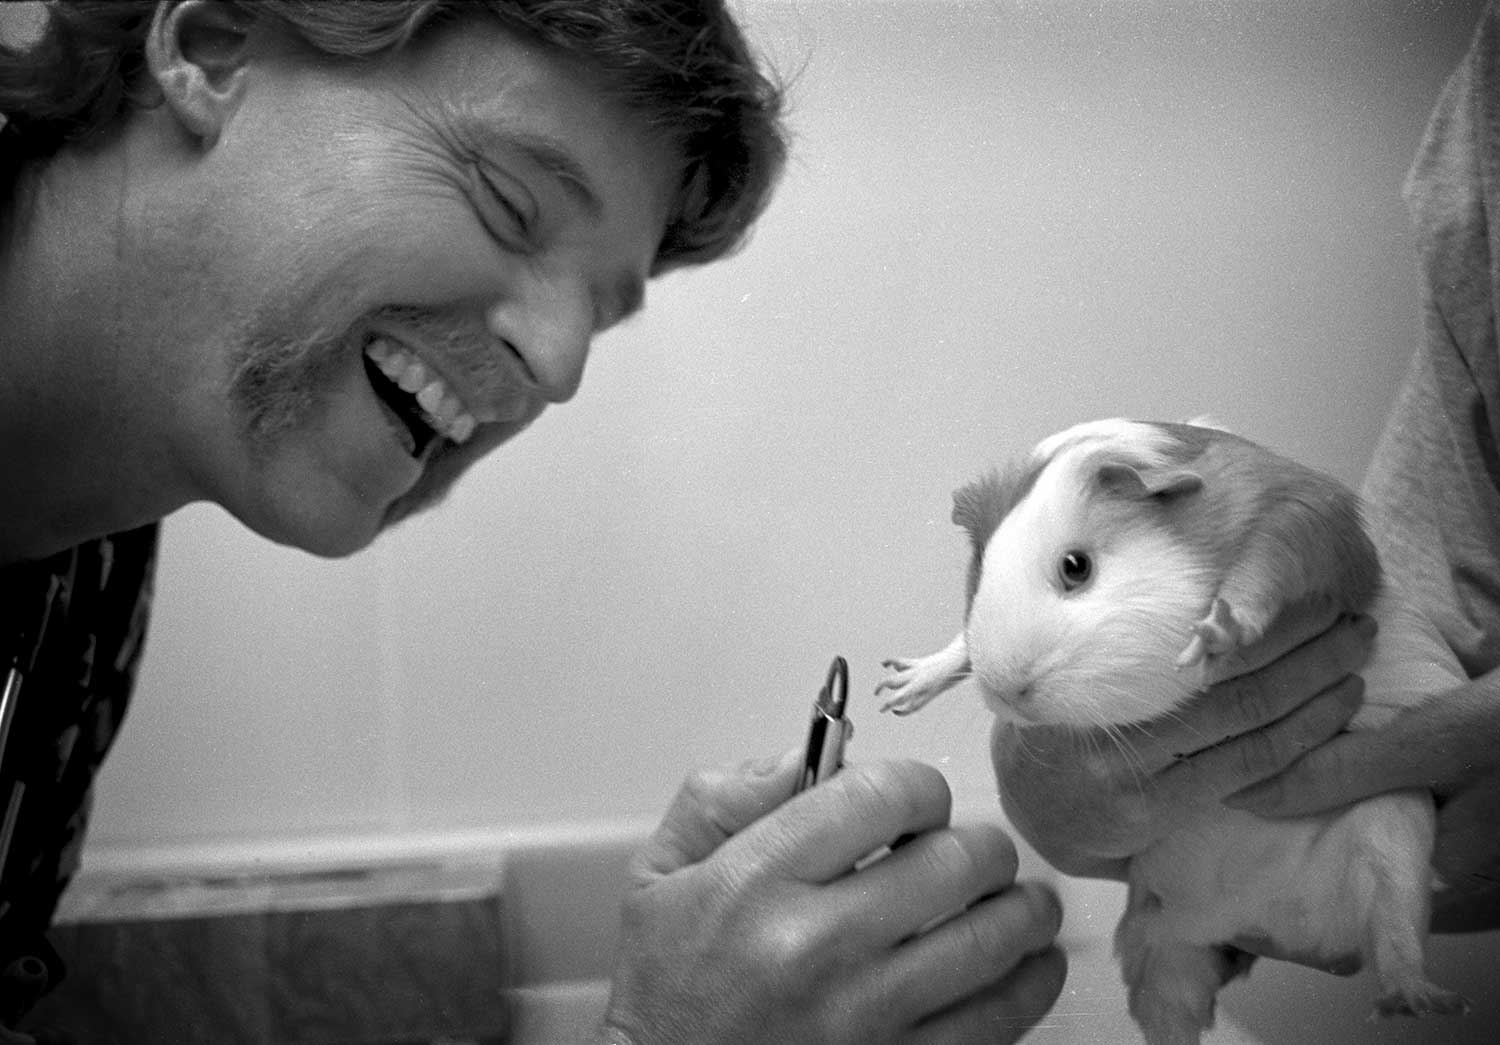 Veterinarian Bill Sander takes a break from surgery Friday to trim a patient’s toenails. photo by Cory Soldwedel- 1999